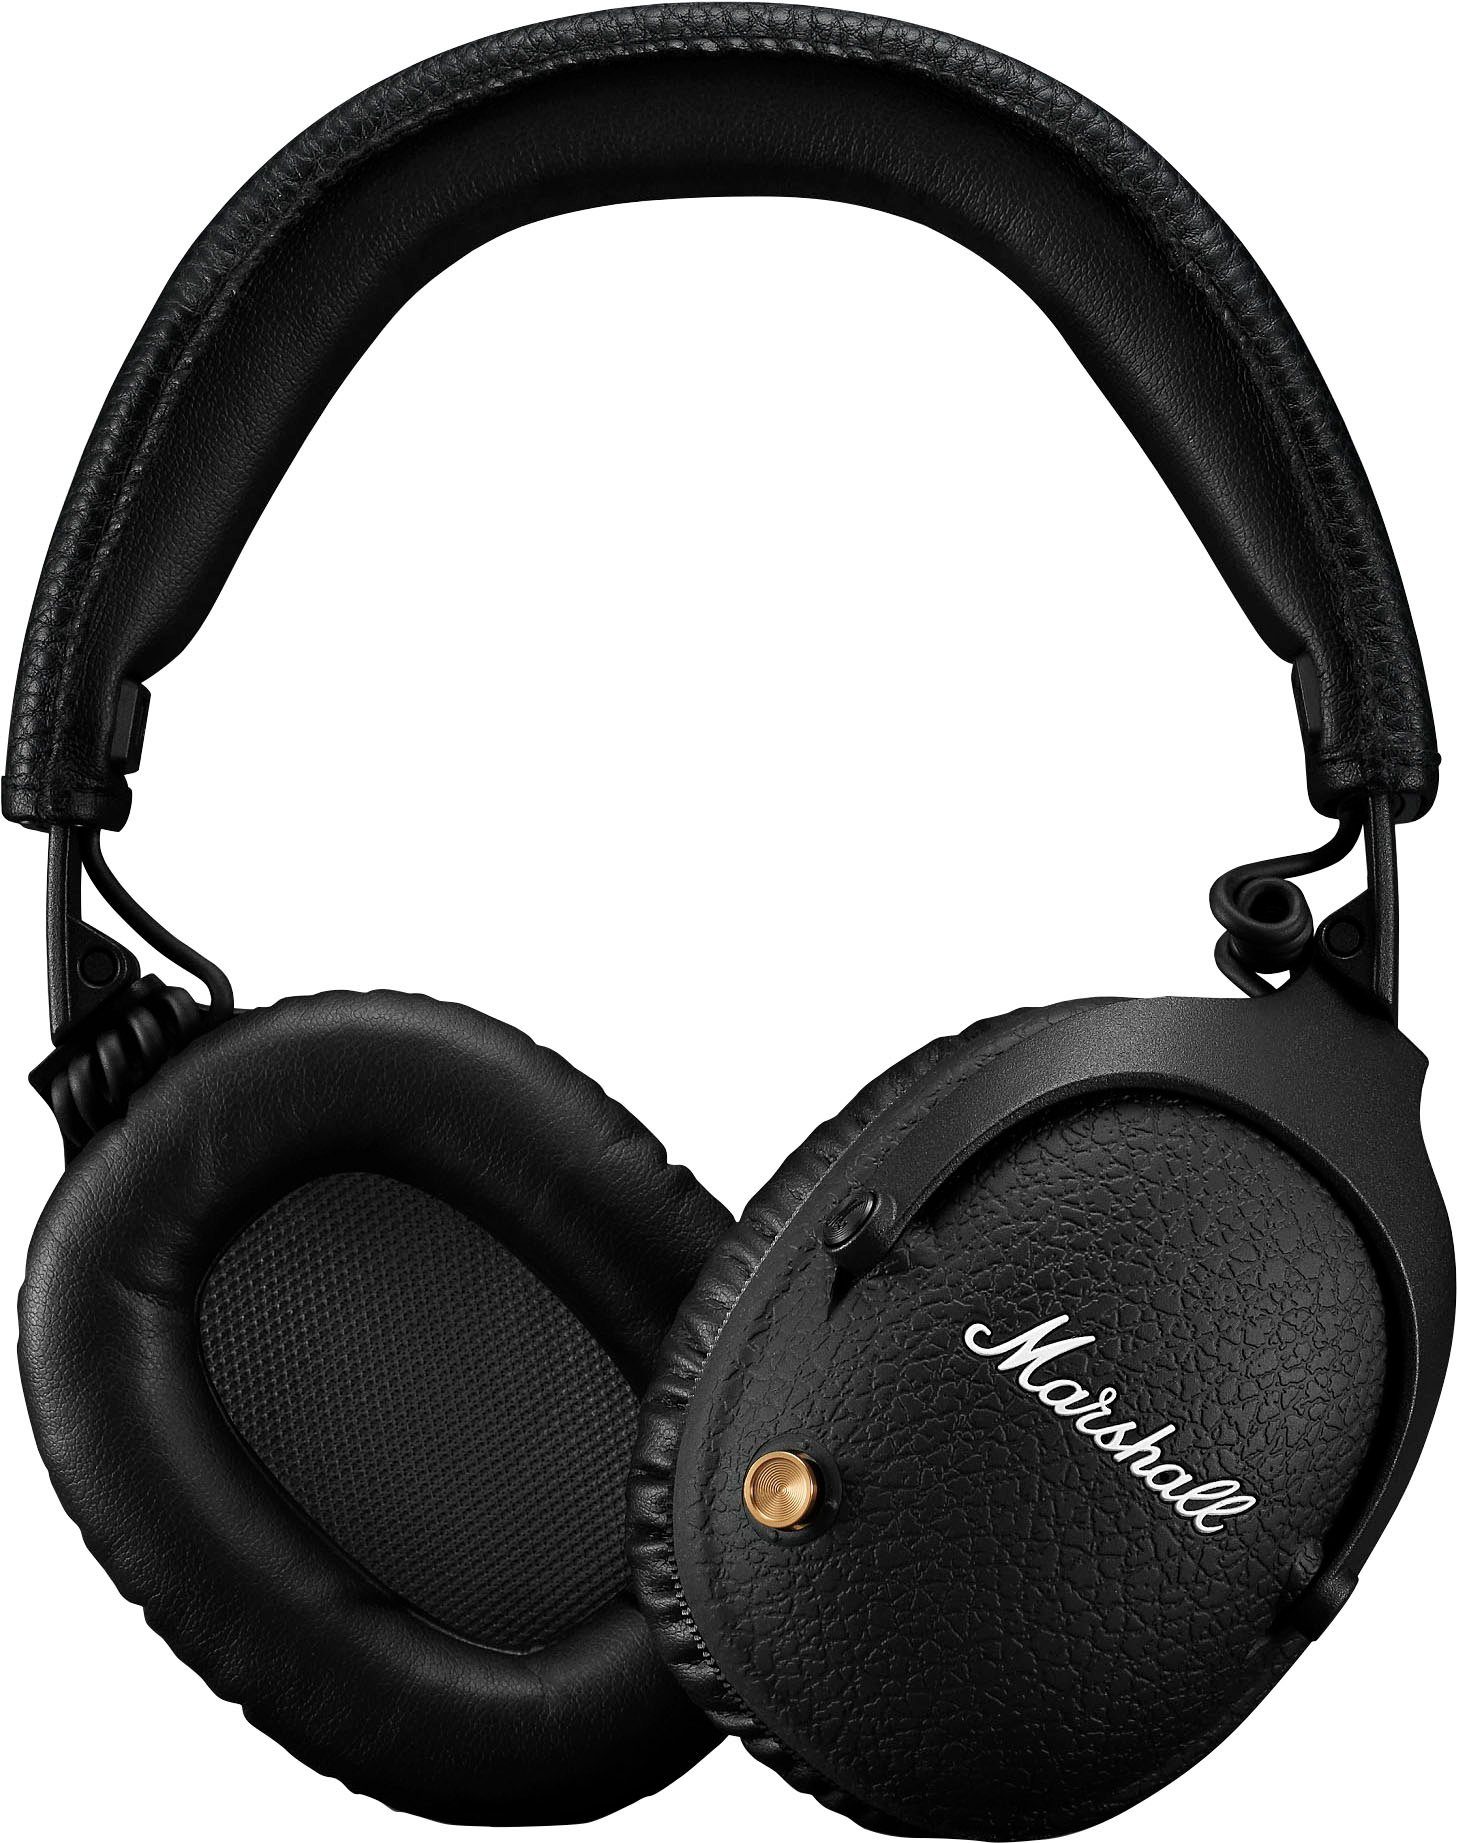 Marshall MONITOR II A.N.C. (Active Bluetooth) (ANC), Noise Cancelling Noise-Reduction, Google Sprachsteuerung, Bluetooth-Kopfhörer Assistant